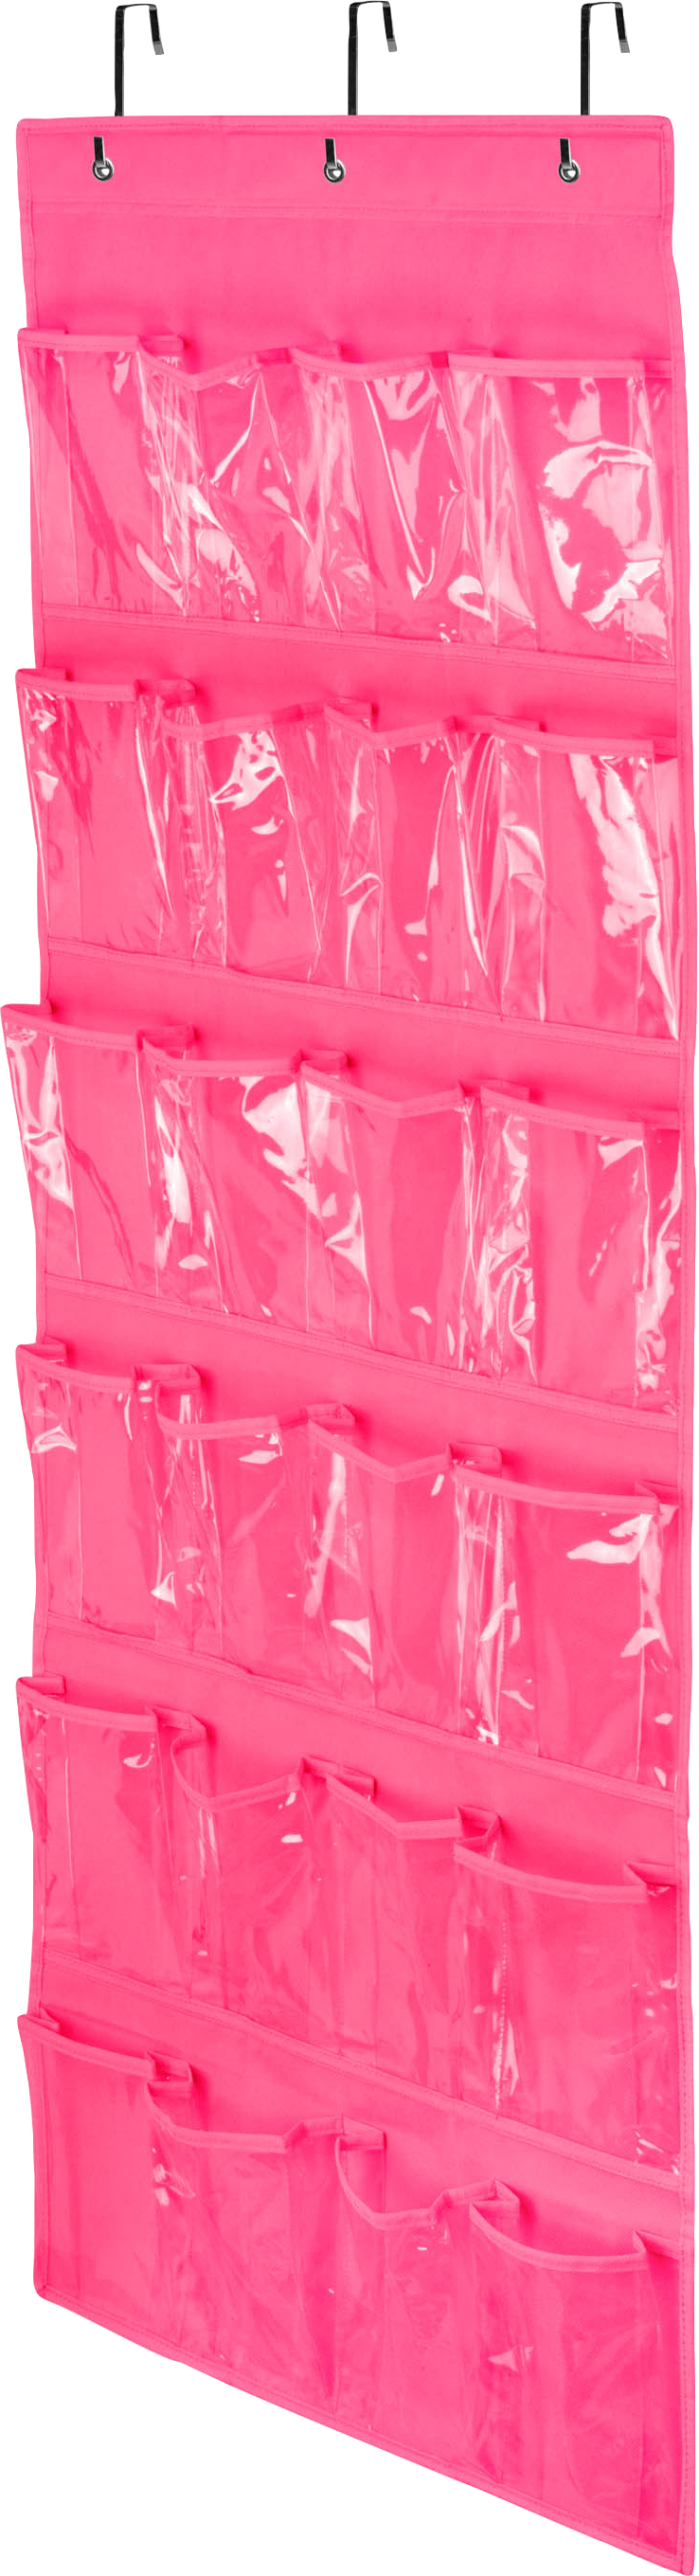 Over-the-Door Shoe and Accessory Organizer 24 Pocket/Non-Woven Pink, PACKAGE 1Pk